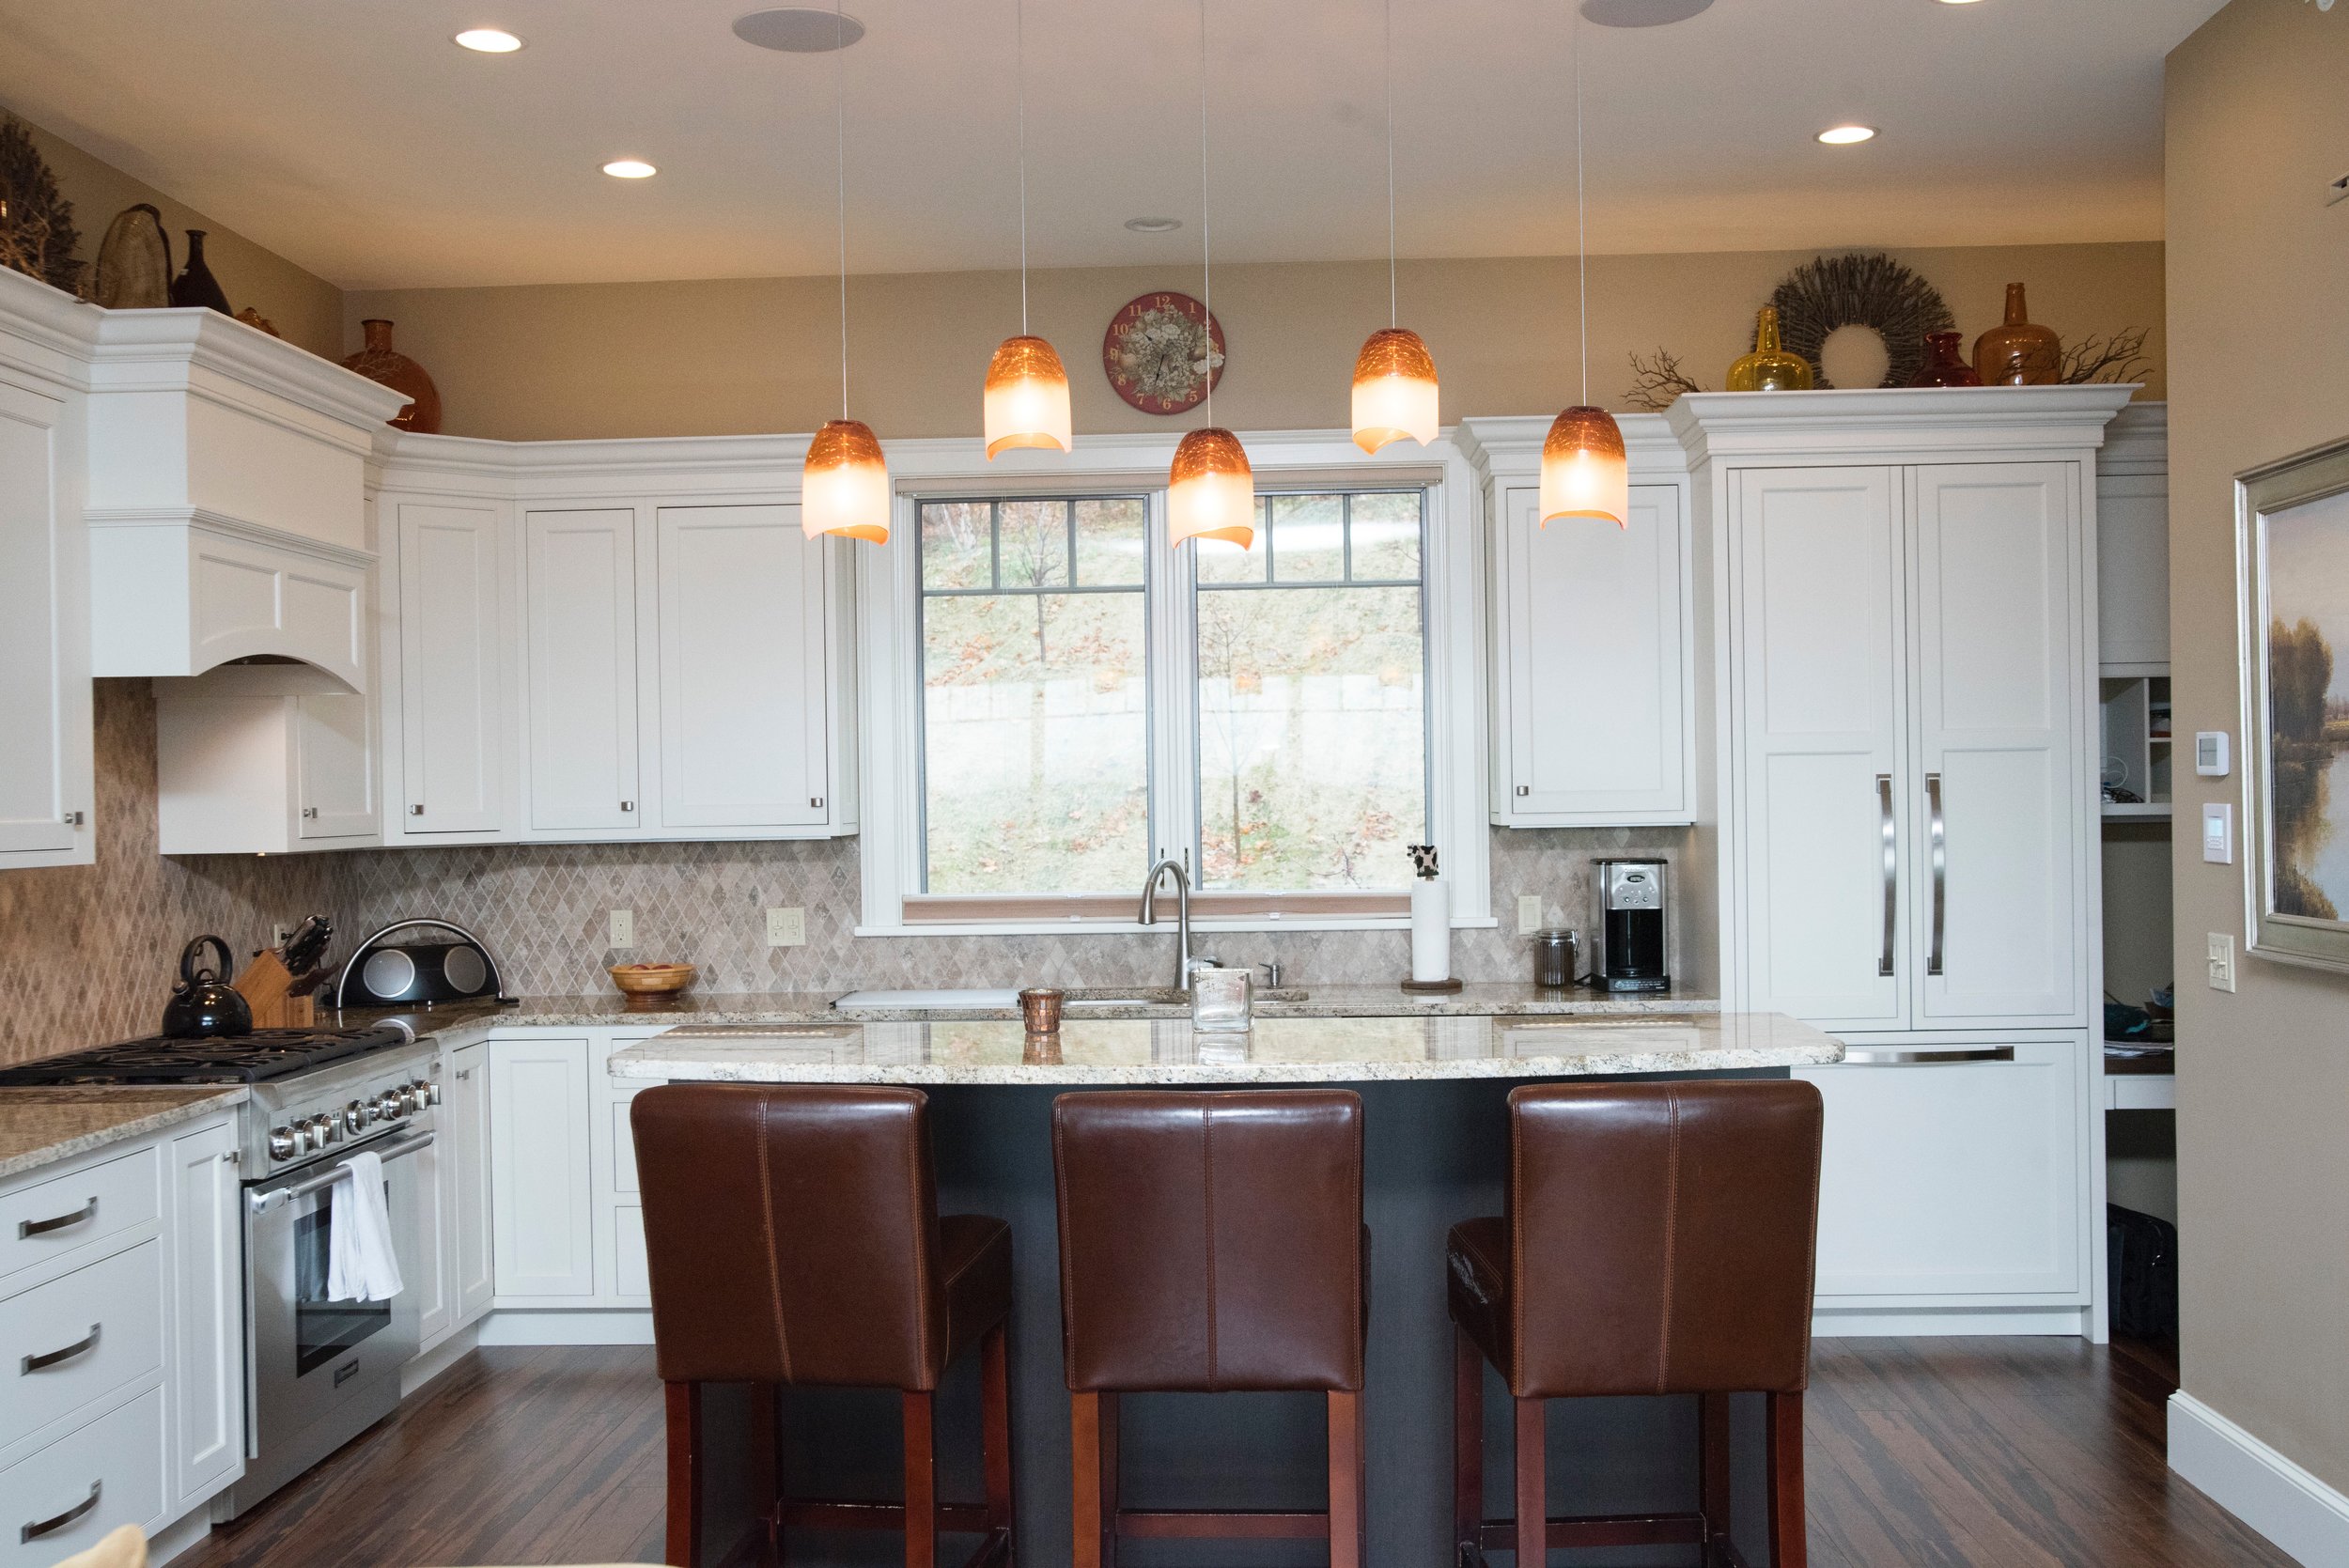 Quechee 2015 The clean lines of this kitchen and unique lighting features highlight balance of colors and warmth.jpg